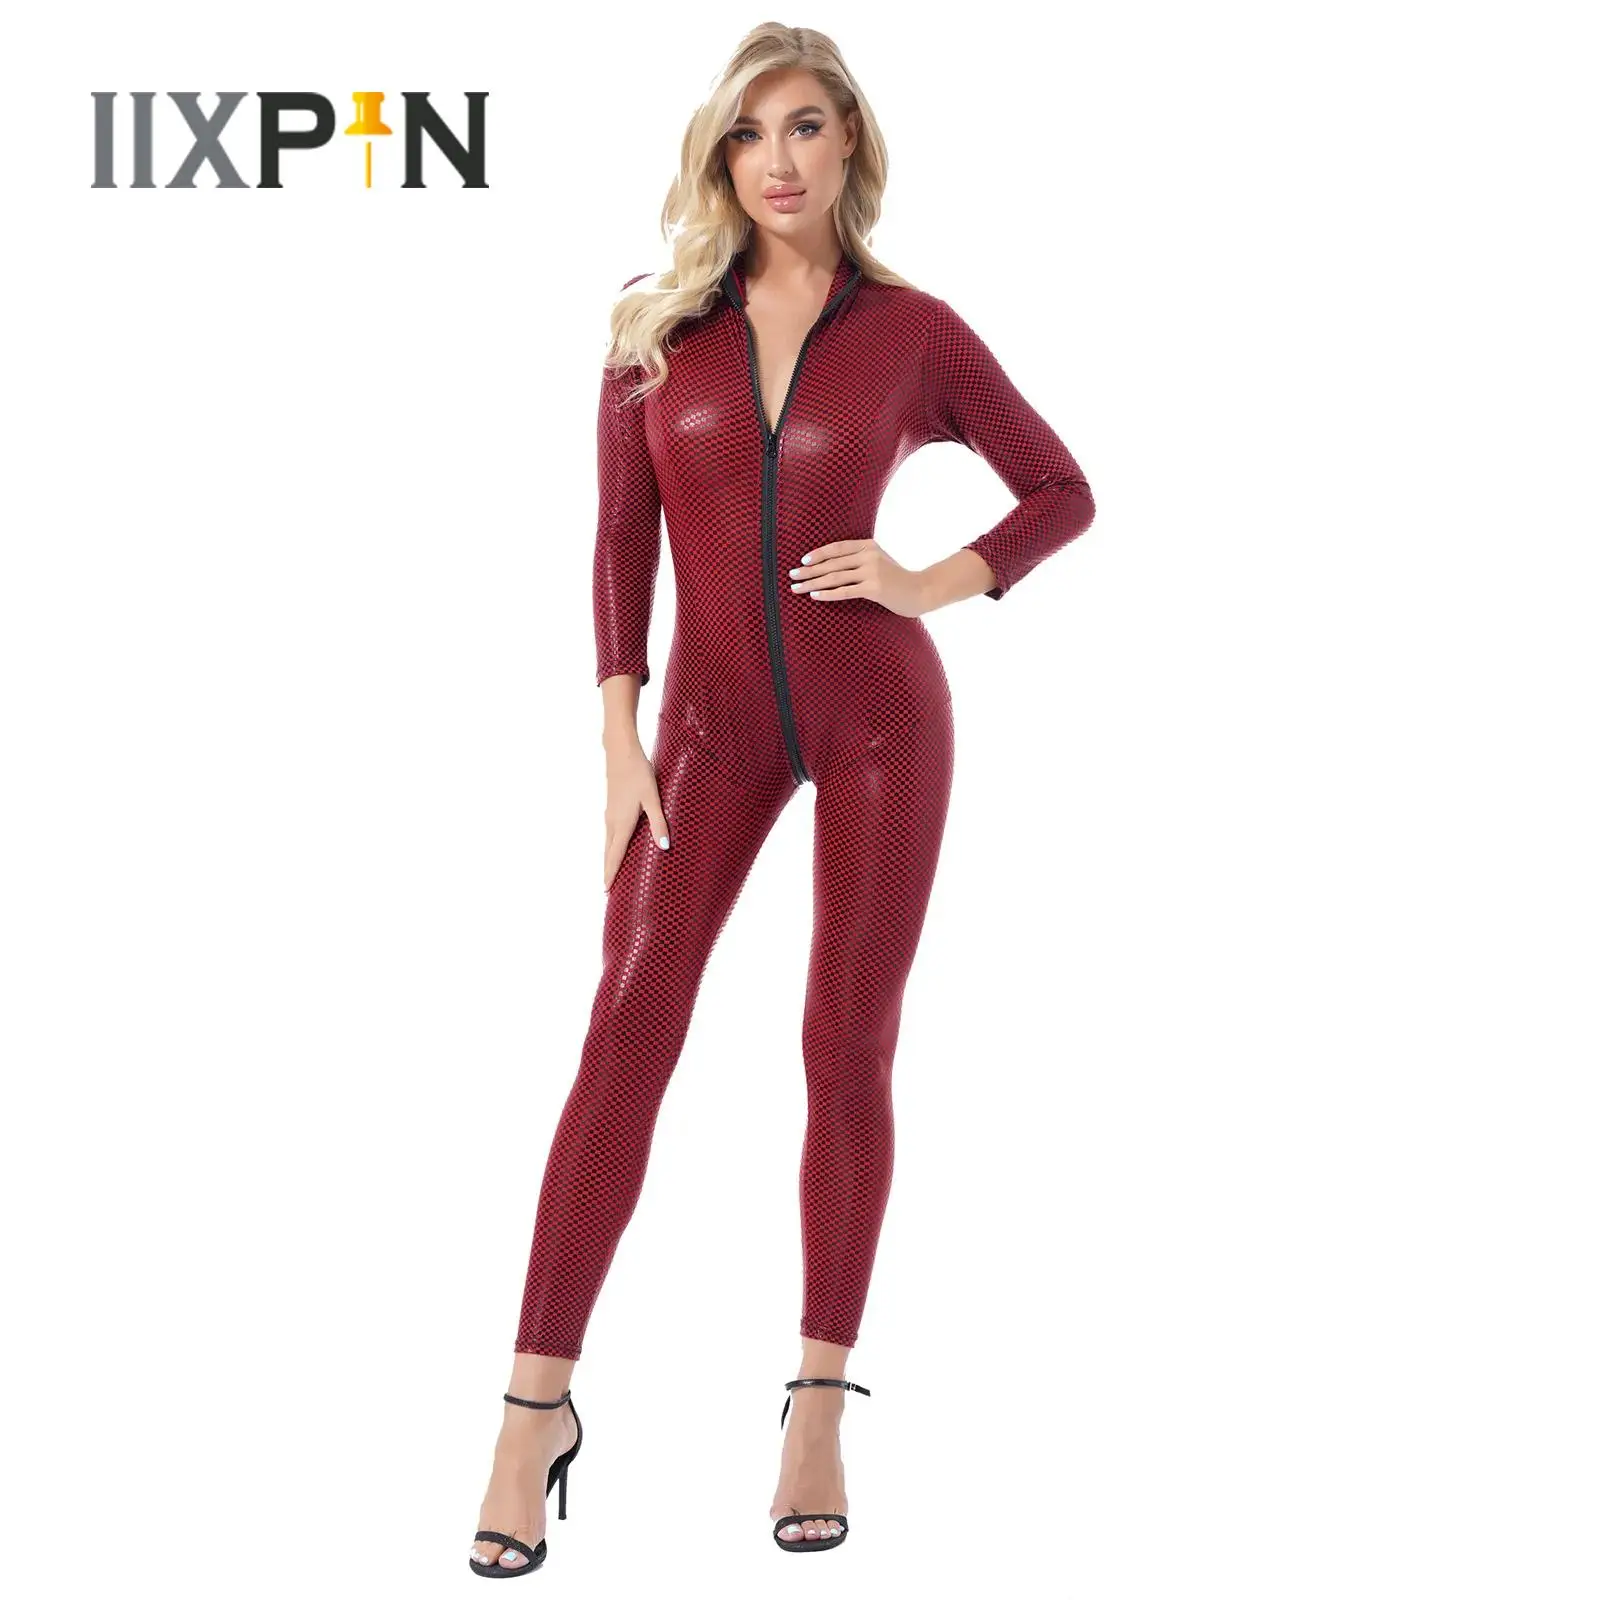 

Women Crotchless Patent Leather Plaid Bodysuit Jumpsuit Club Costume Long Sleeve Zipper Open Crotch Skinny Catsuit with G-string